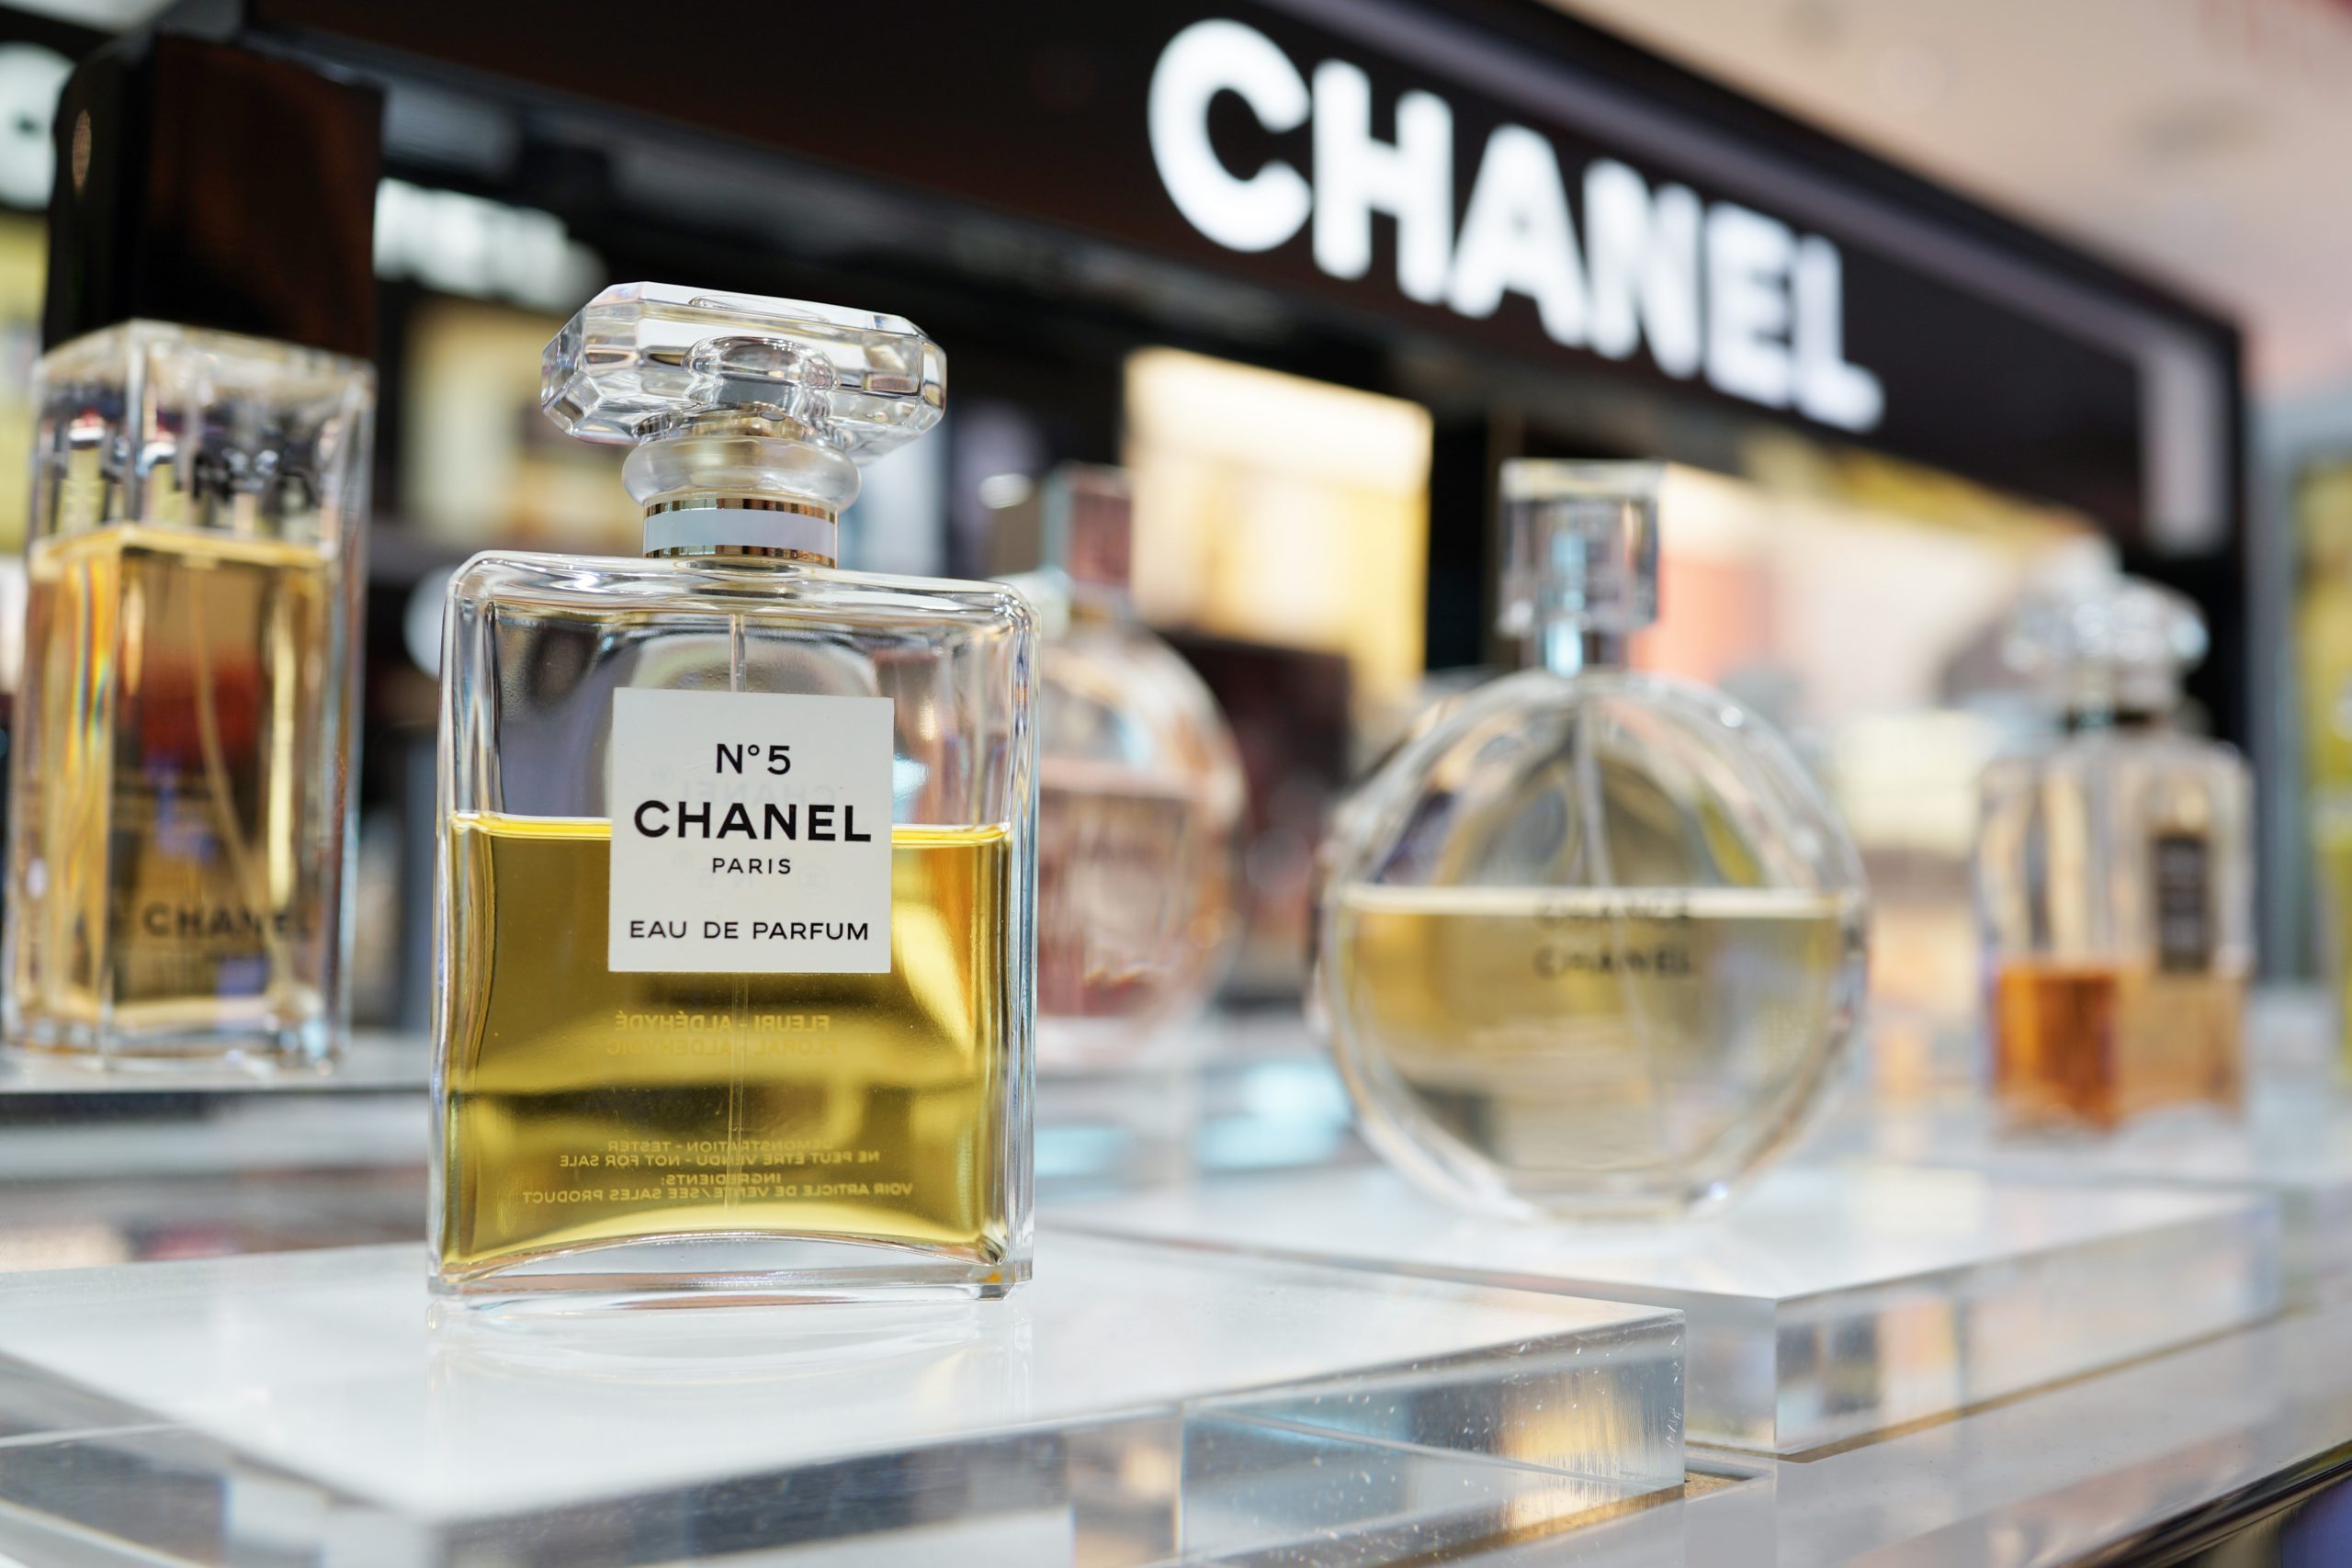 <p>The best value in duty-free shopping at airports can usually be found in the cosmetics and fragrances aisles. In Terminal 8 of JFK, for example, there are fully stocked duty-free stores for:</p> <ul> <li>Estée Lauder</li> <li>MAC</li> <li>Chanel</li> </ul> <p>So find your favorite scents, smells, and looks before flying home, and save a few dollars (or euros) on your makeup and perfume.</p>